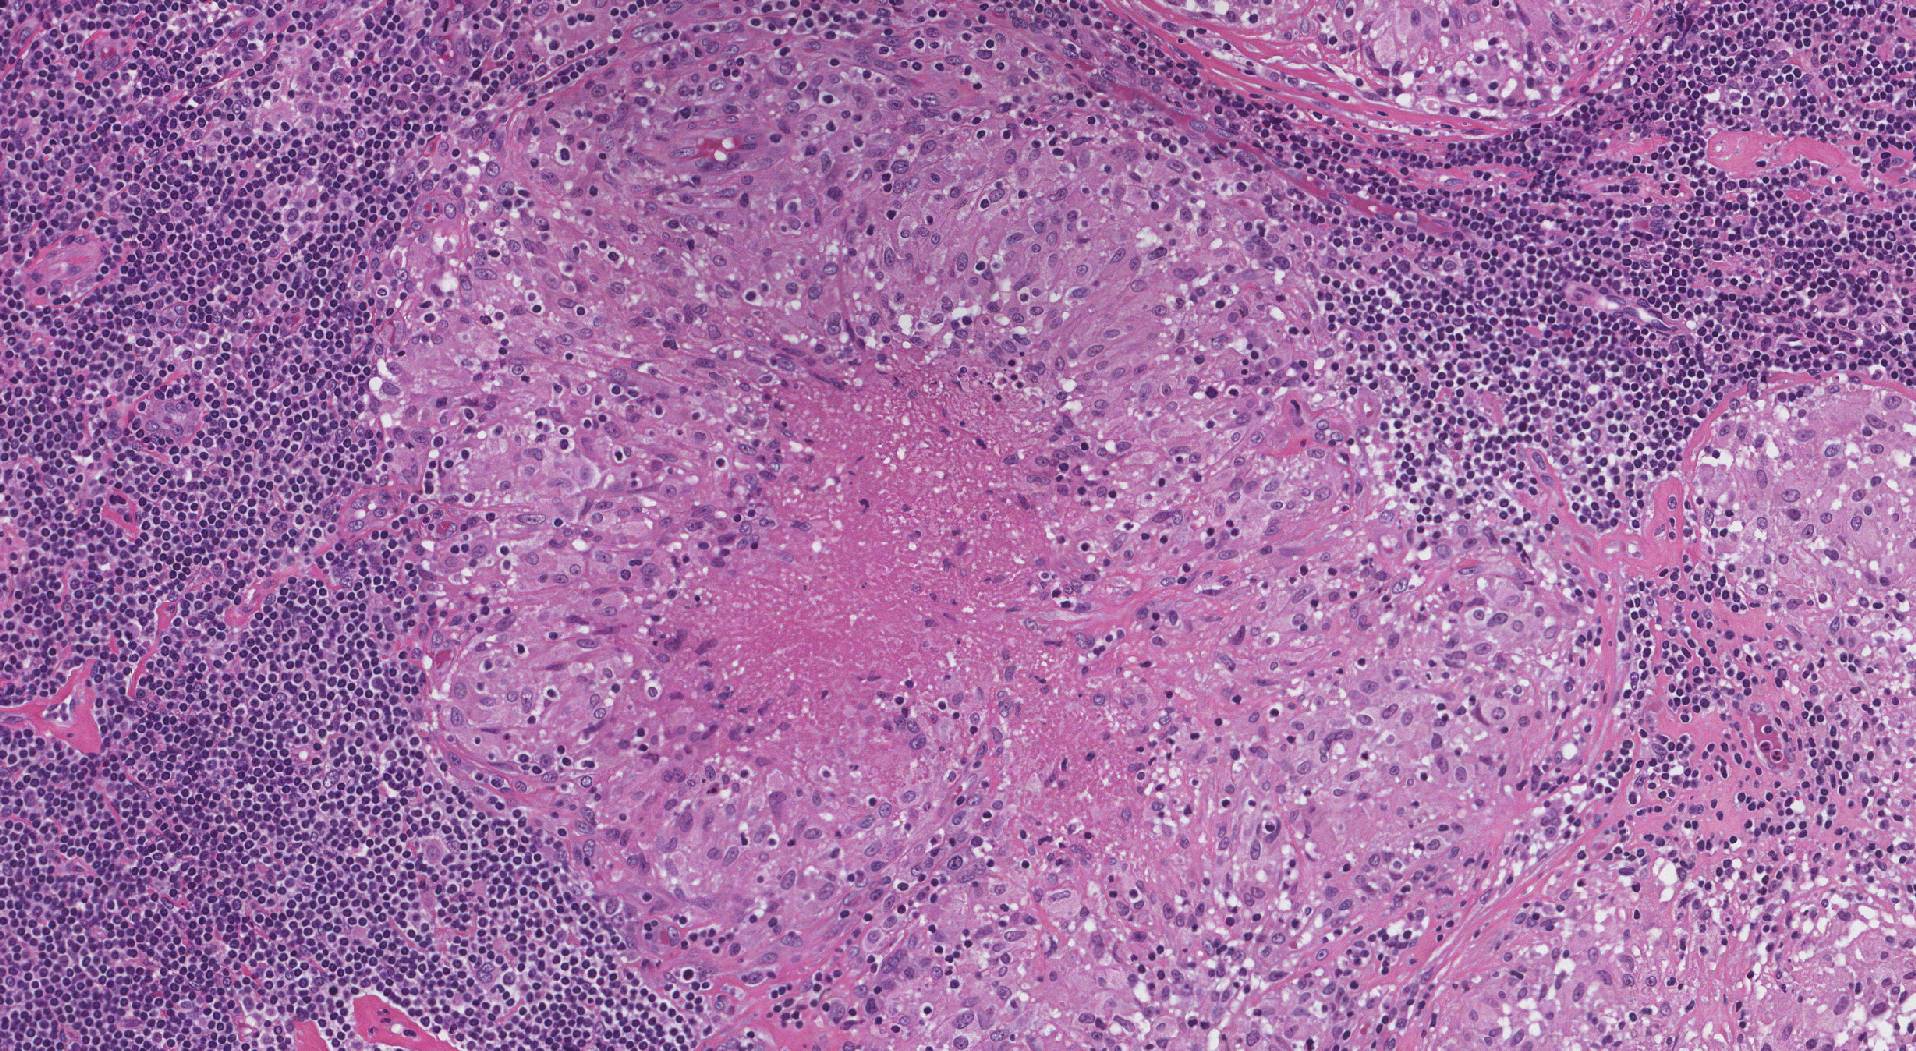 epithelioid cells in a granuloma